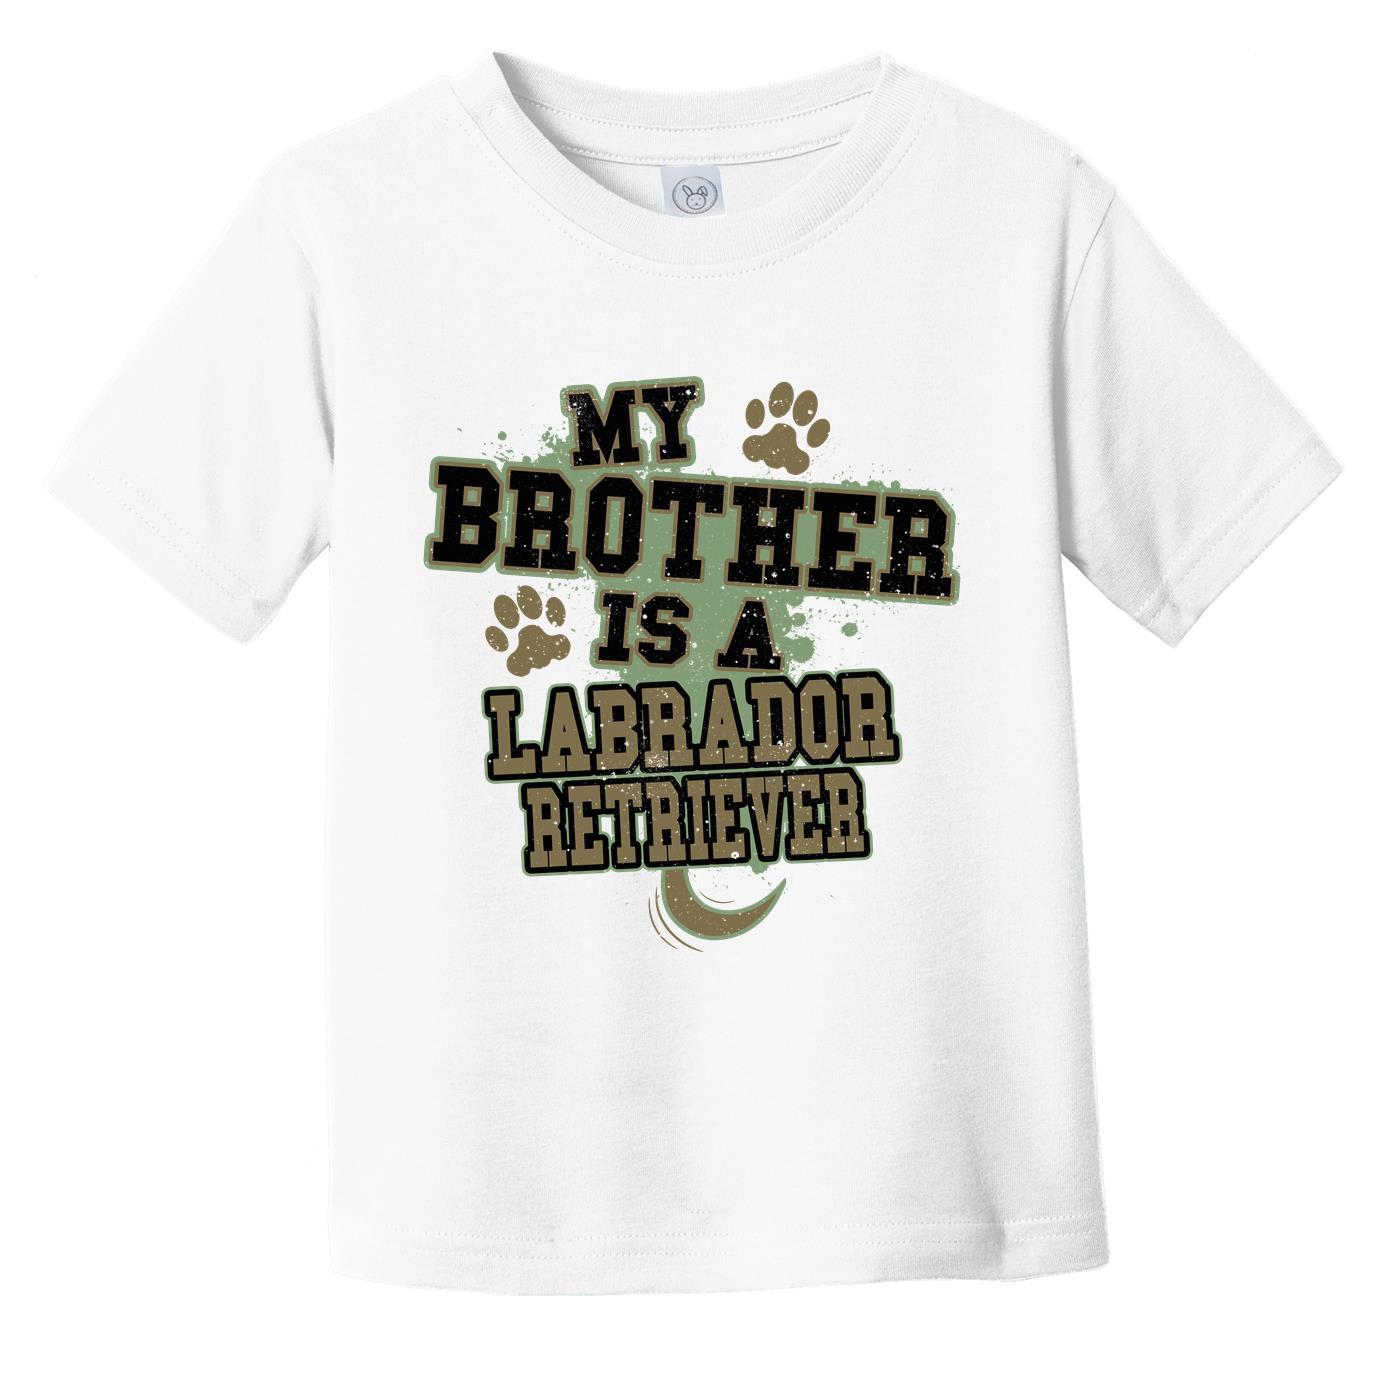 My Brother Is A Labrador Retriever Funny Dog Infant Toddler T-Shirt